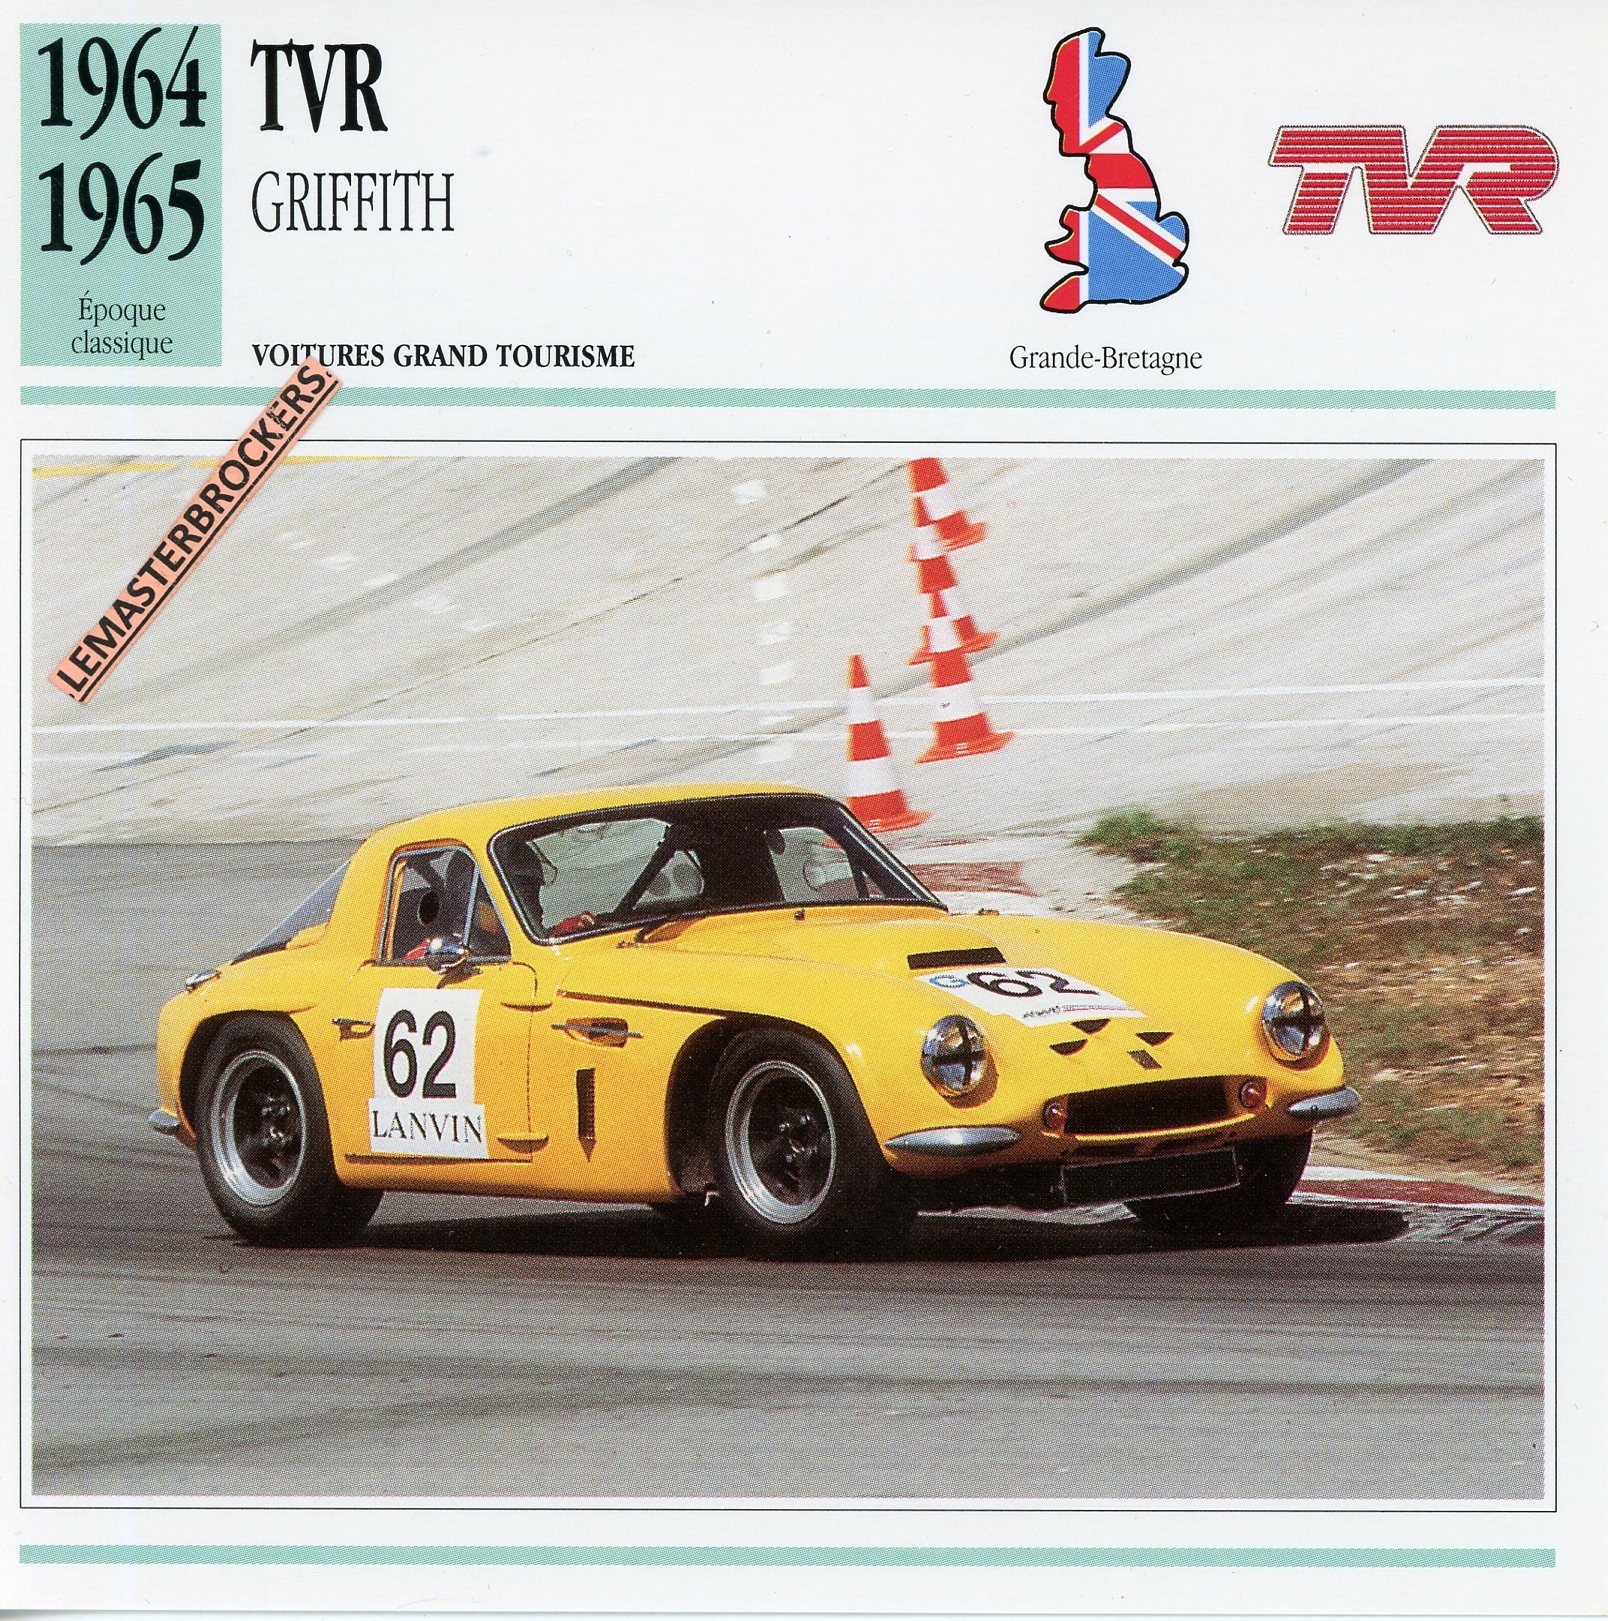 TVR-GRIFFITH-GTS8-GTS-1964-1965-FICHE-AUTO-LEMASTERBROCKERS-CARD-CARS-ATLAS